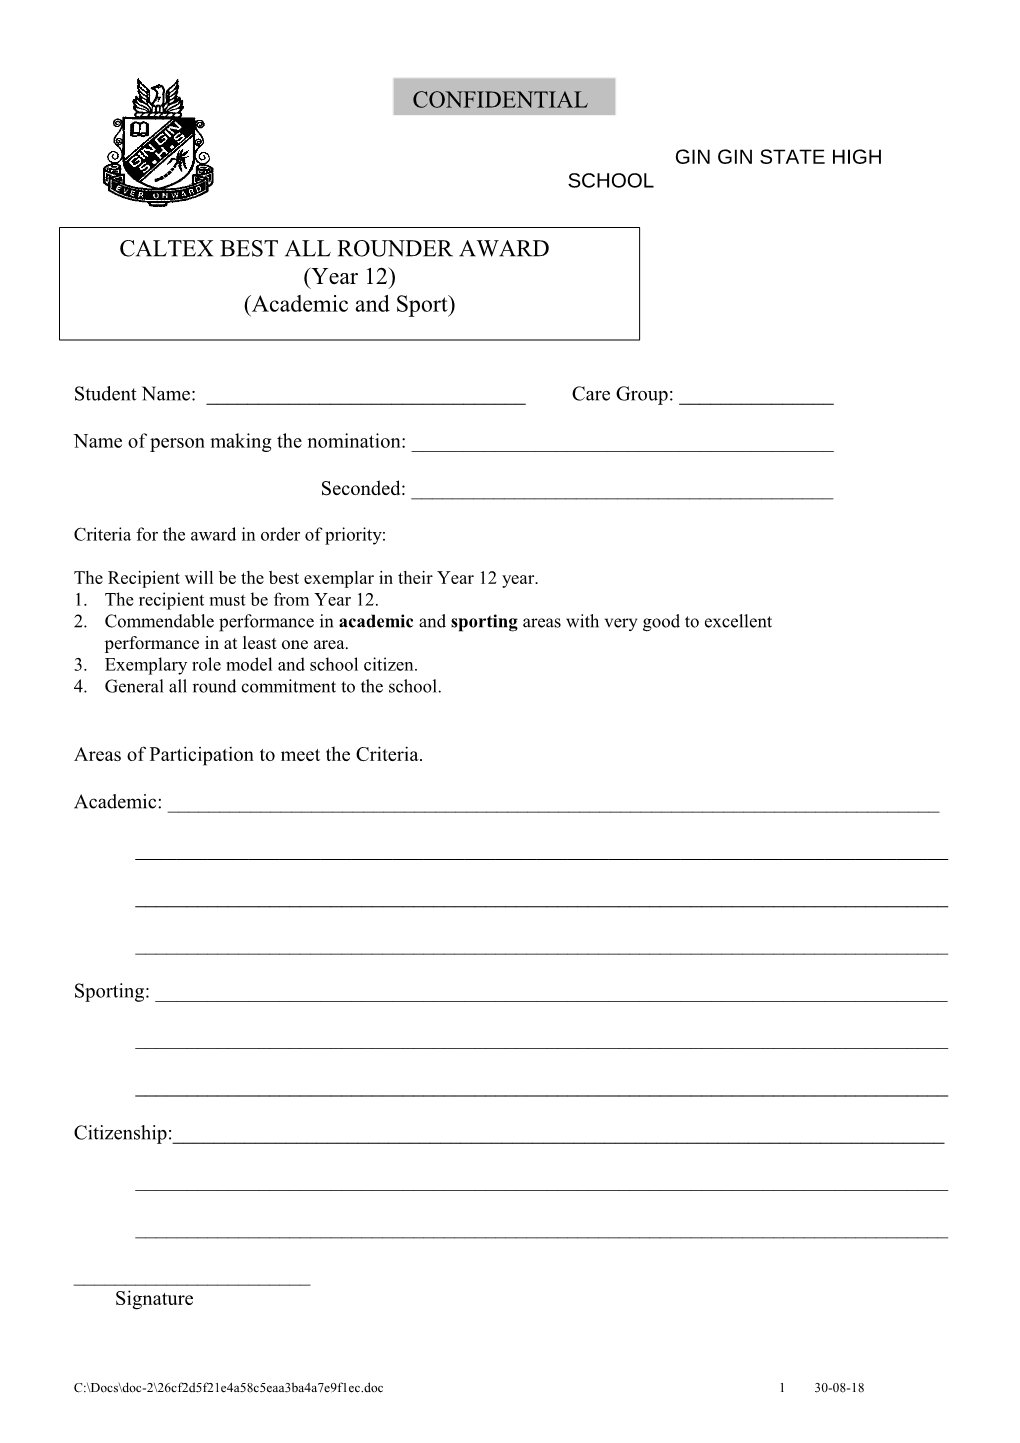 Special Awards Nomination Forms